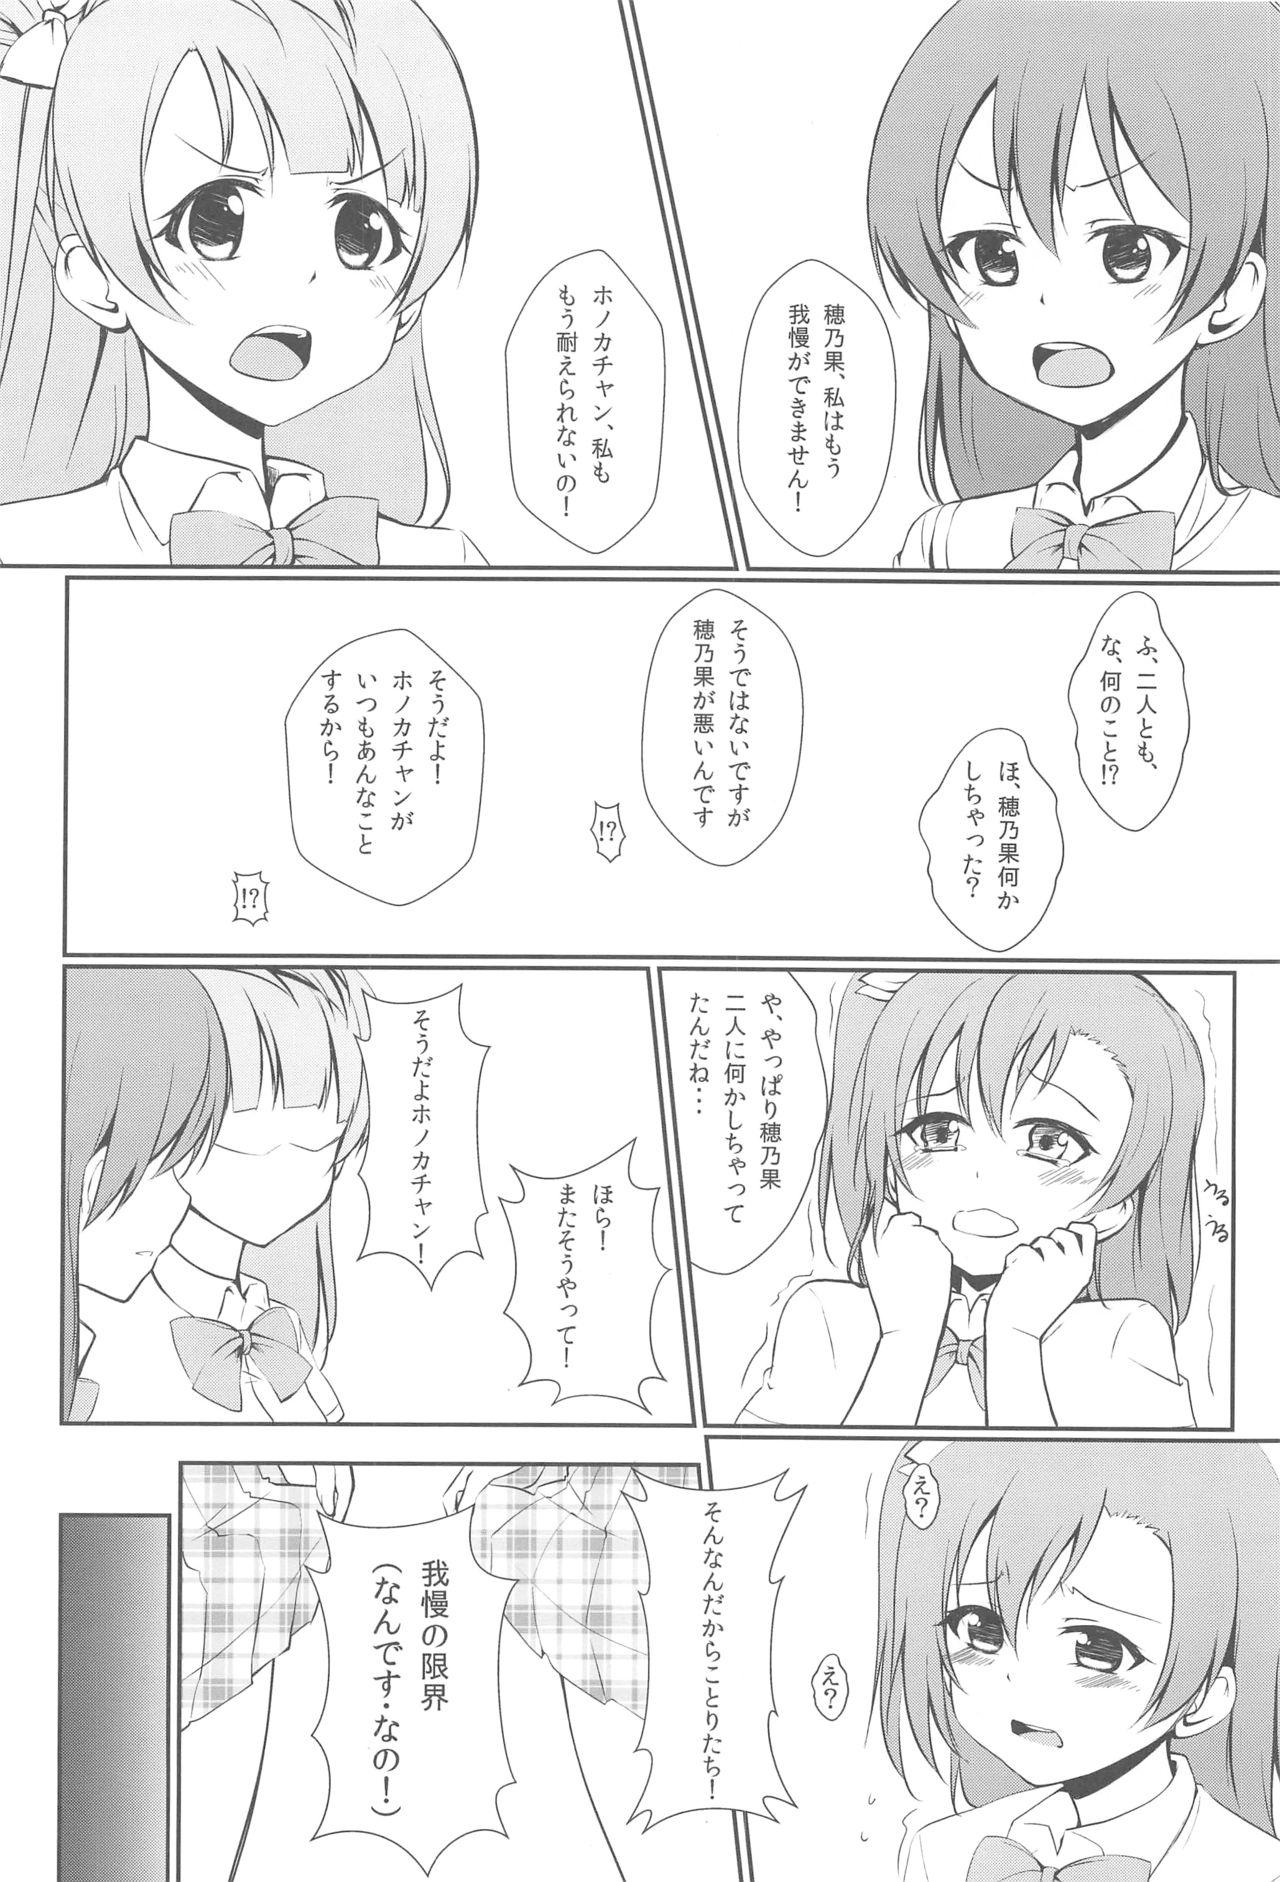 3some UNBALANCED LOVE. - Love live Outdoor - Page 3